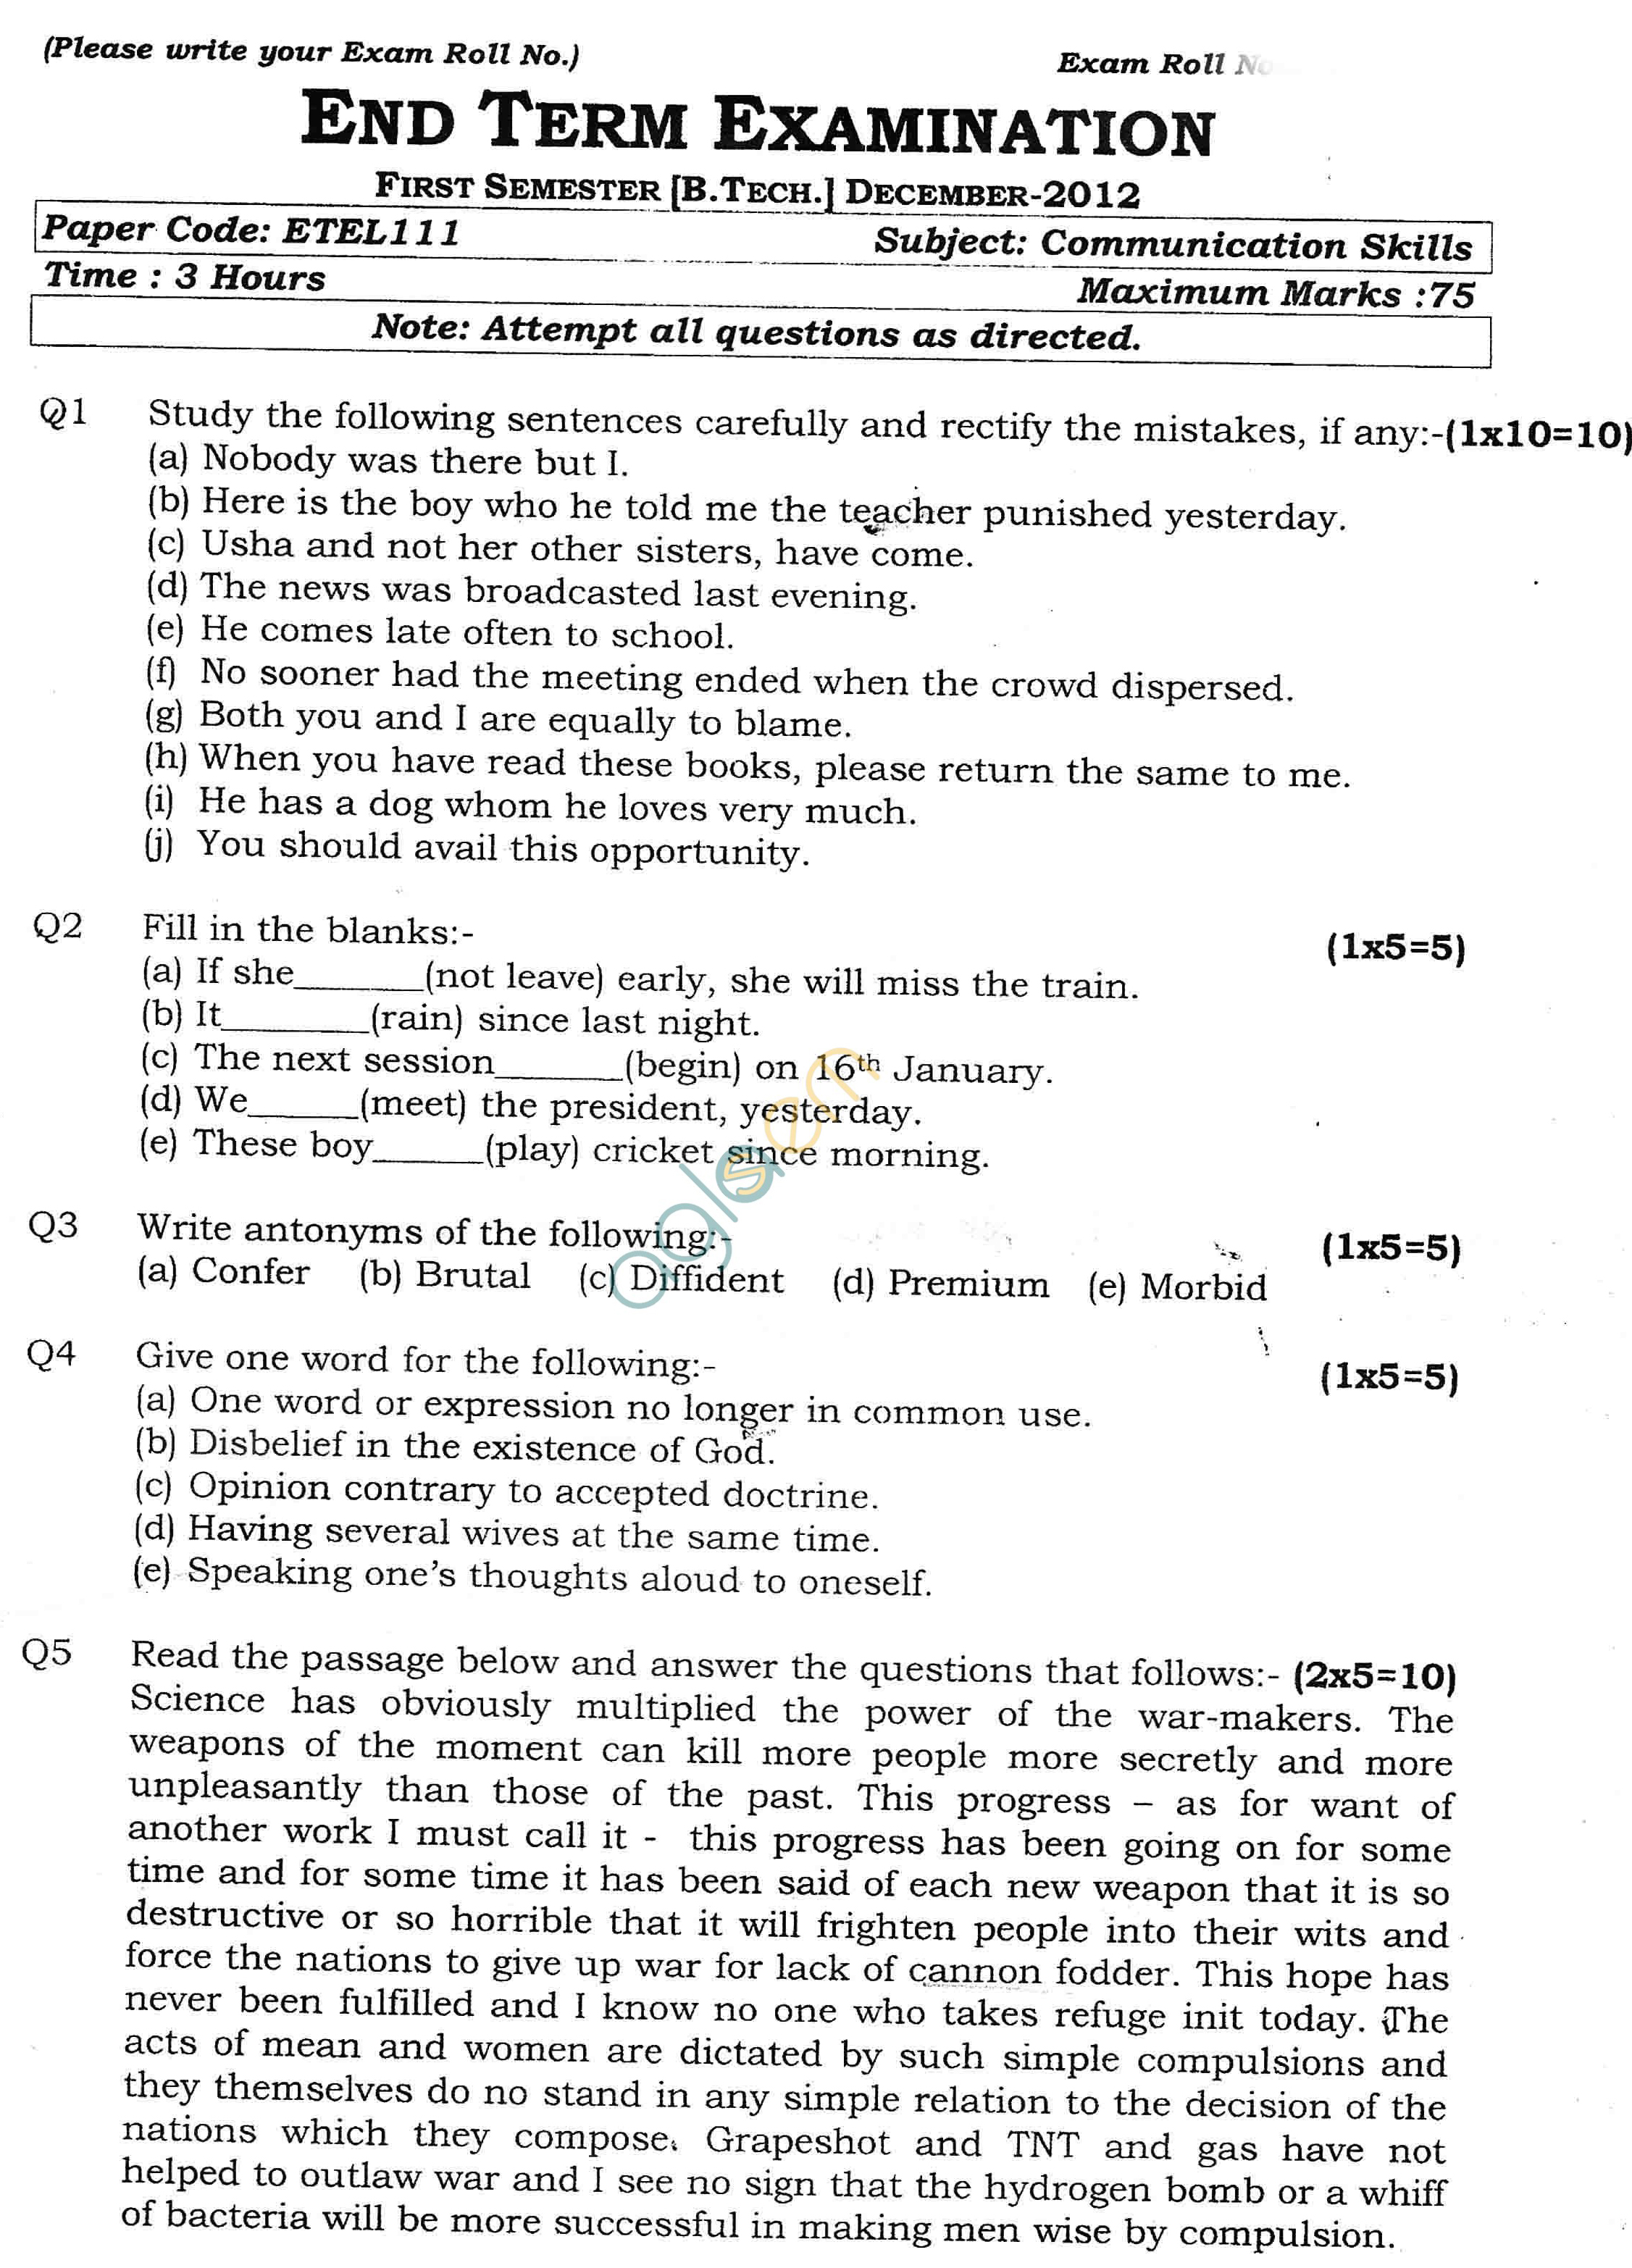 GGSIPU: Question Papers First Semester  end Term 2012  ETEL-111